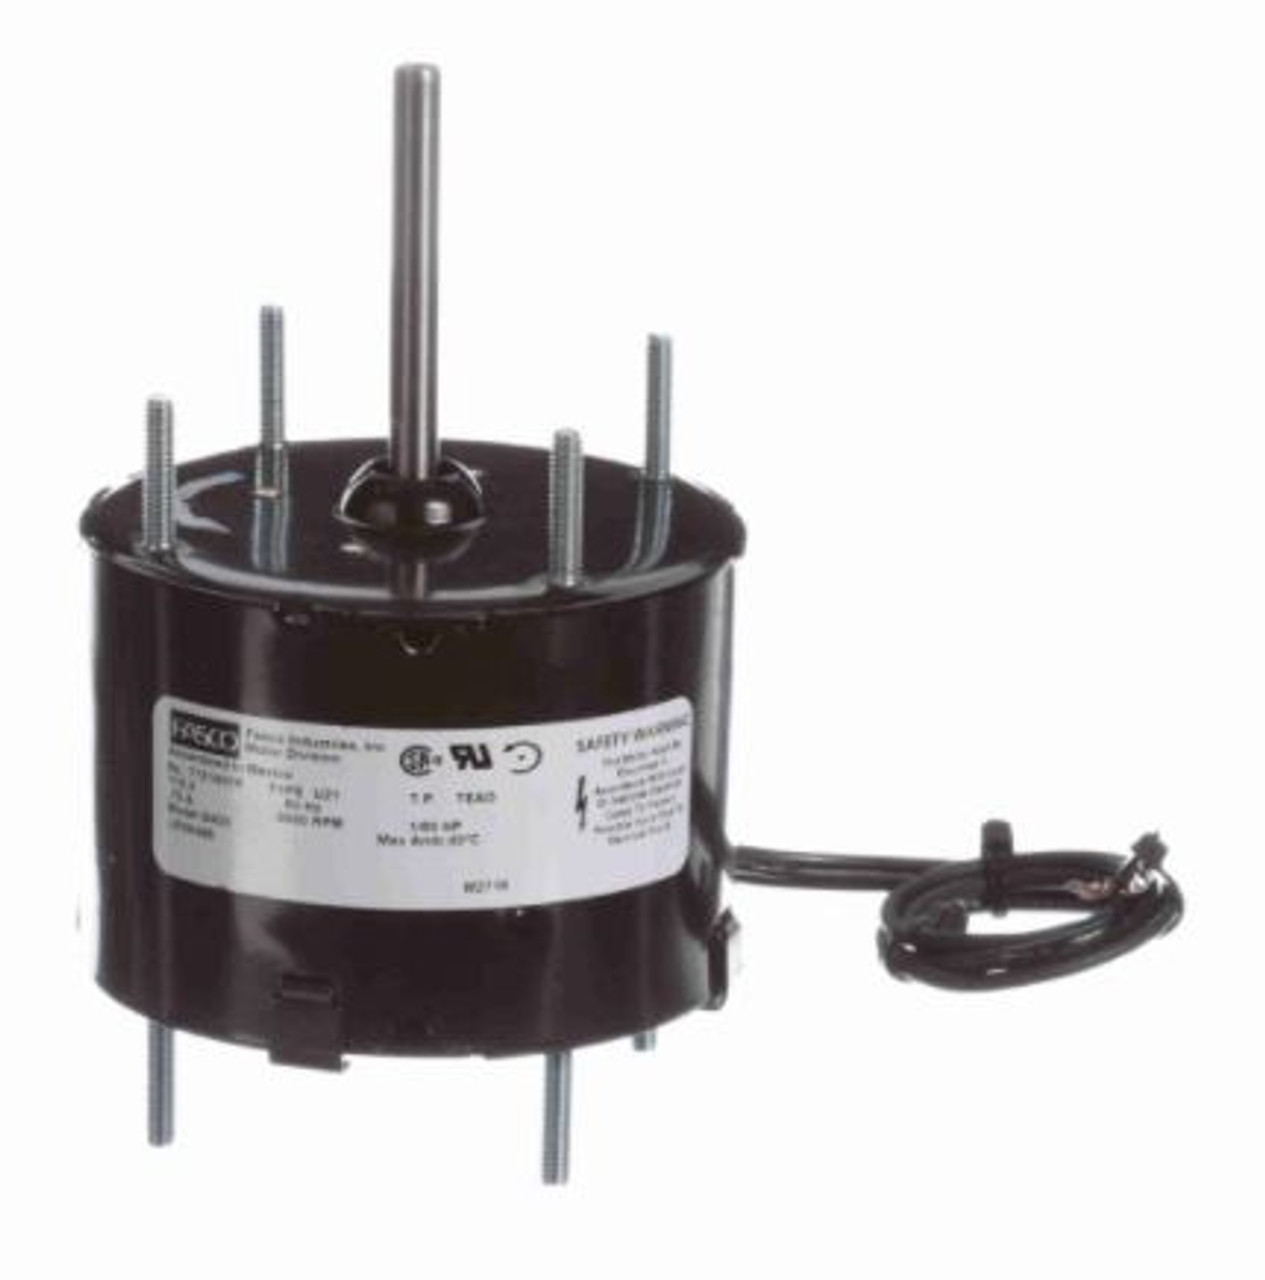 60Hz 0.75 amps 3000rpm 1/60HP Fasco D403 3.3 Frame Totally Enclosed Shaded Pole General Purpose Motor with Sleeve Bearing CCW Rotation 115V